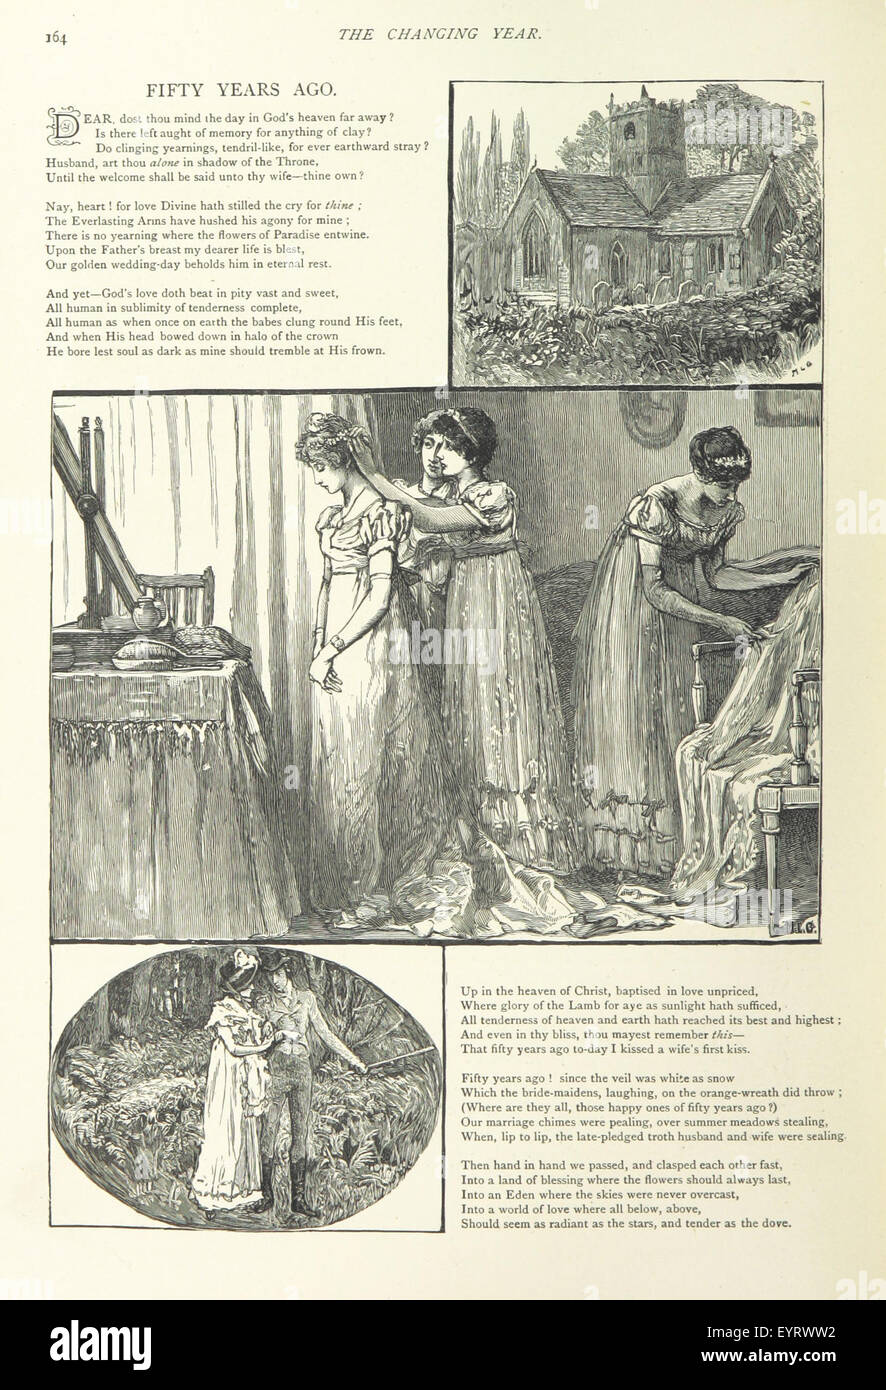 The Changing Year: being poems and pictures of life and nature. Illustrations by A. Barraud, etc Image taken from page 170 of 'The Changing Year being Stock Photo